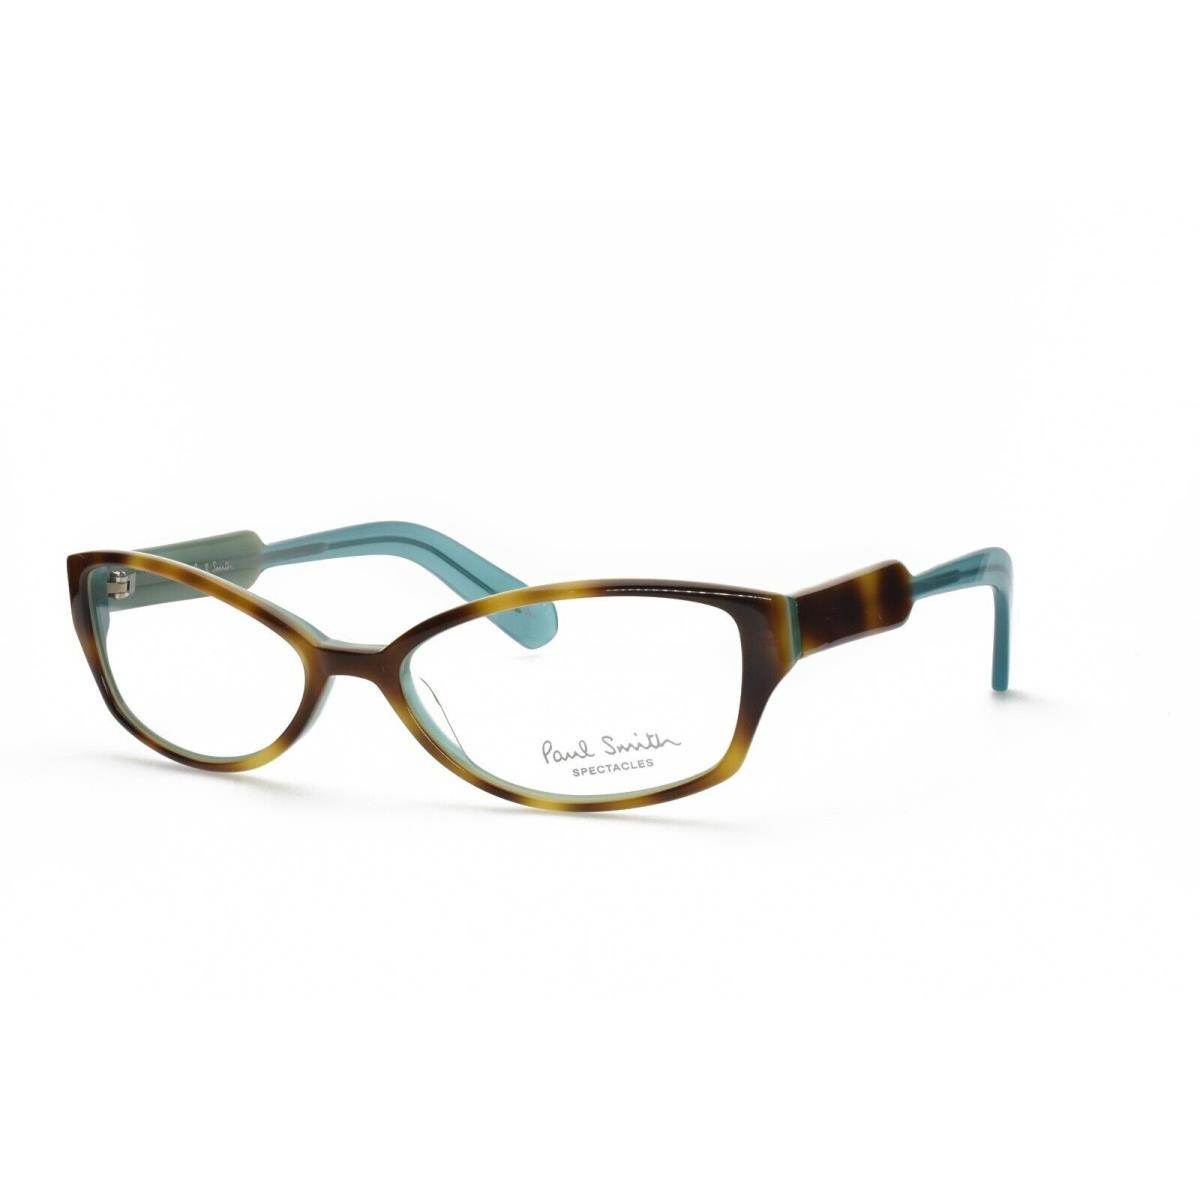 Paul Smith PS 297 Dmaq Eyeglasses Frames Only 52-16-135